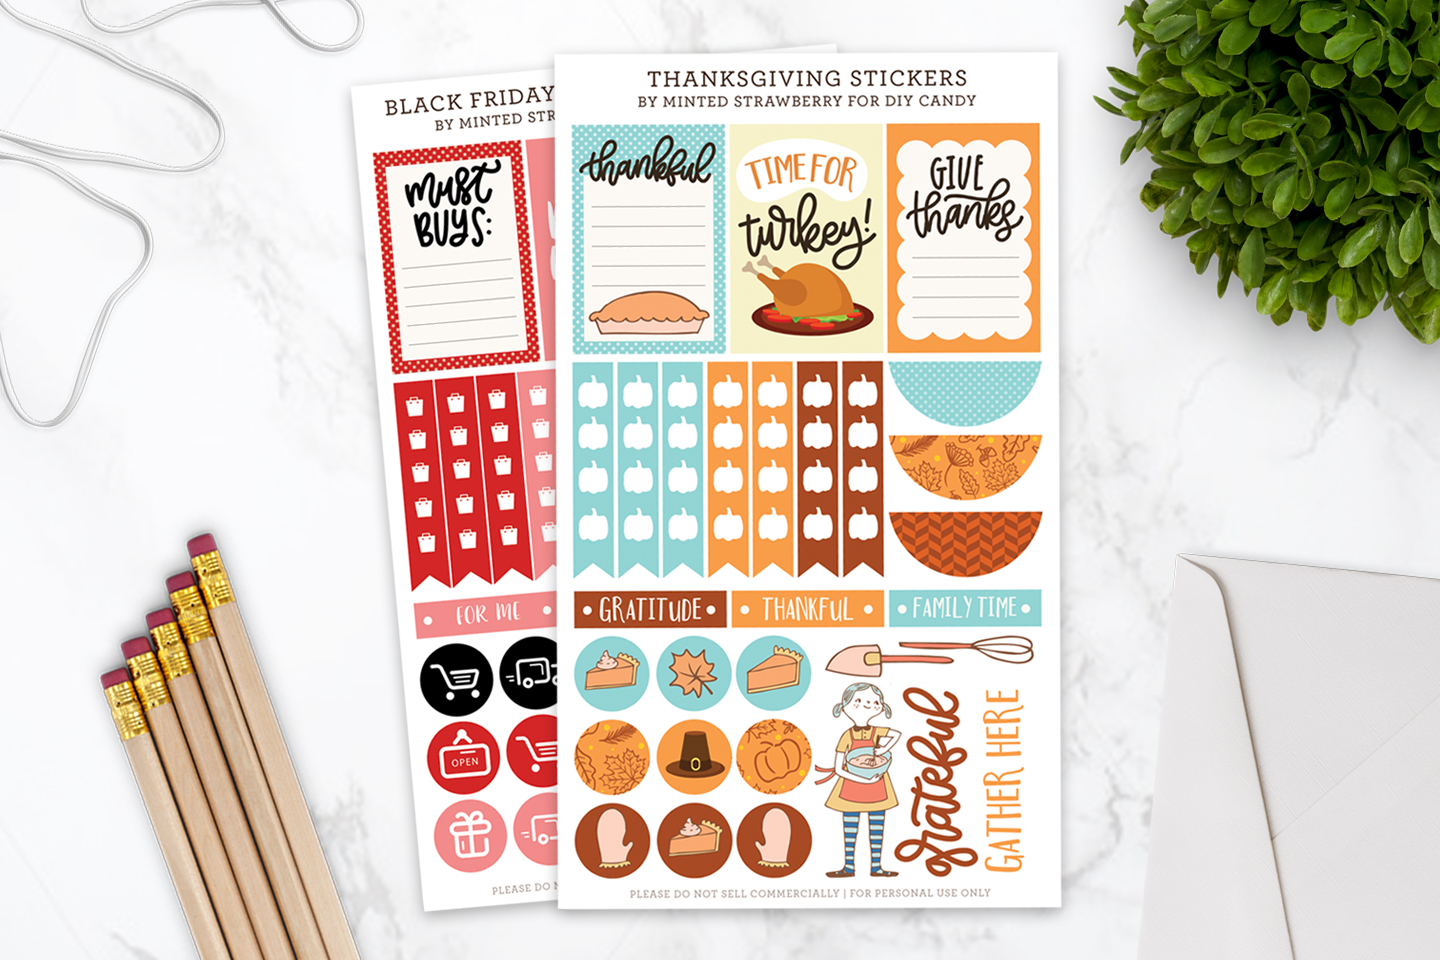 Do you love free planner stickers? Grab yours for Thanksgiving and Black Friday here! They work perfectly with the Happy Planner and many others as well.